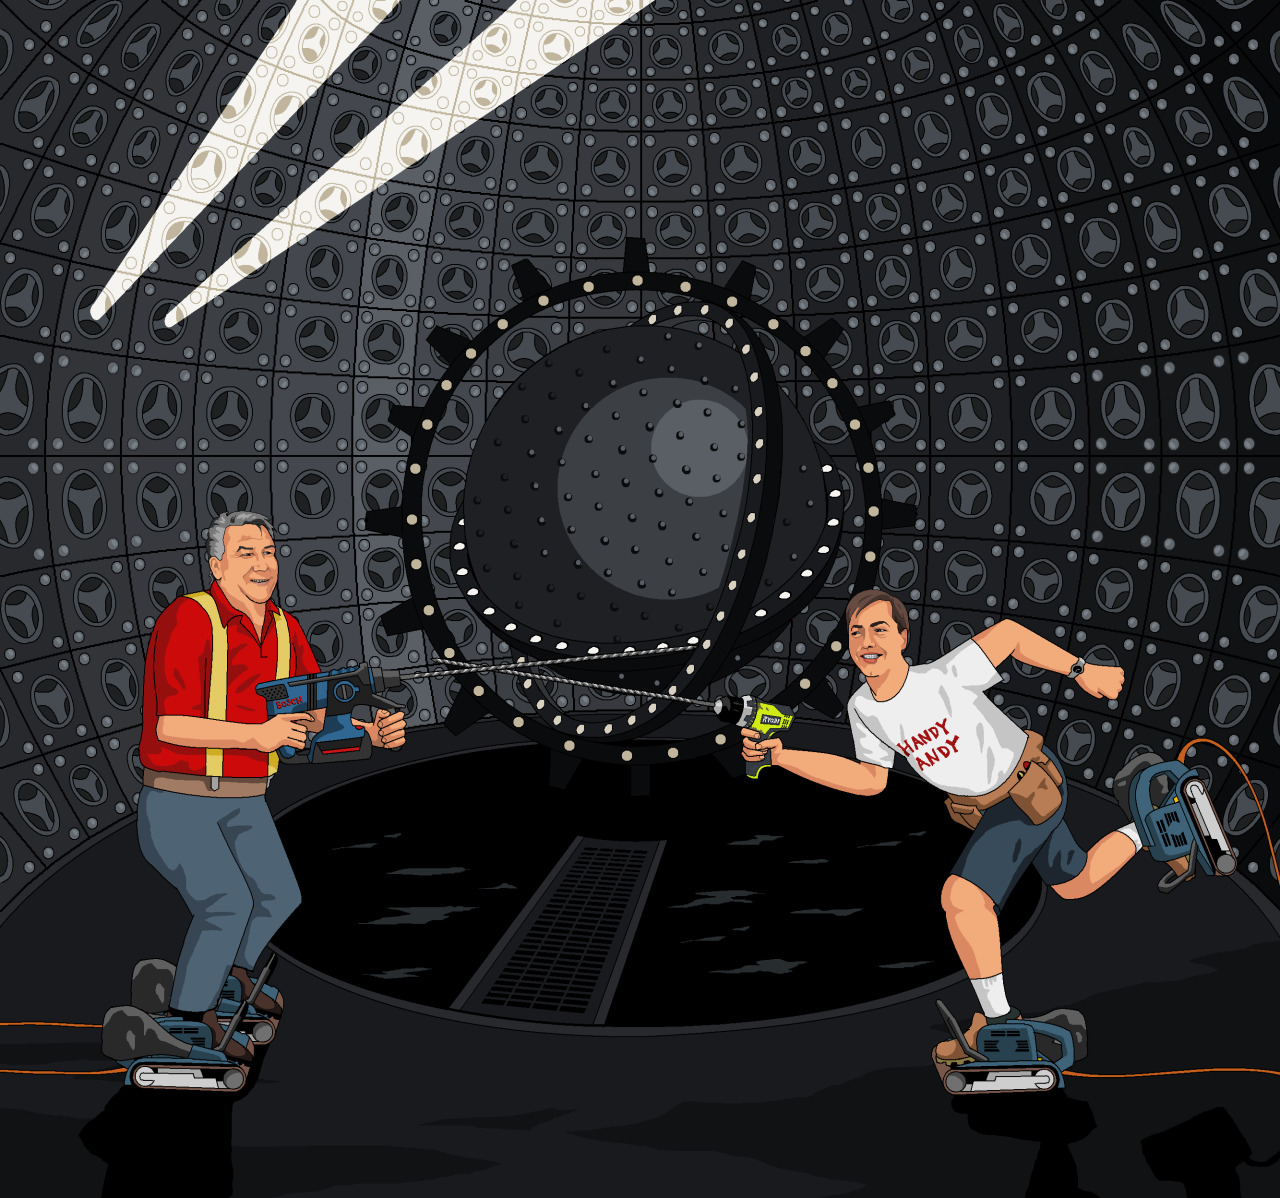 jimllpaintit:
“Handy Andy and Tommy Walsh, having attached belt sanders to their feet like roller skates, are jousting with metre-long drill bits in their drill of choice. Tommy Walsh has opted for a sensible 36V Bosch SDS hammer drill; while Handy...